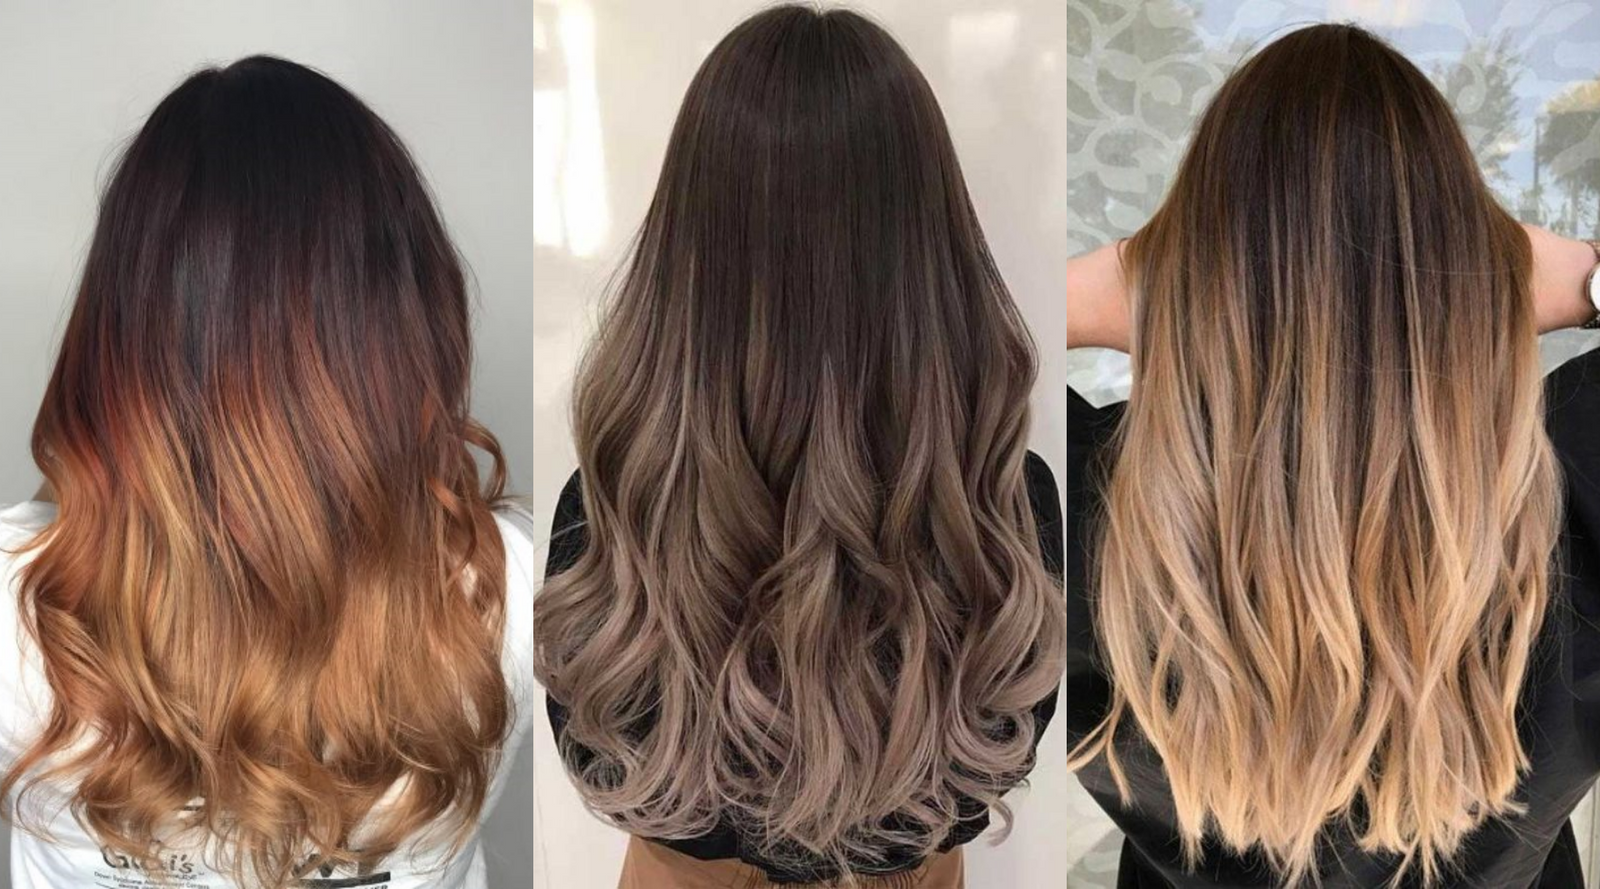 What is ombre hair coloring? - SINIMA Salon